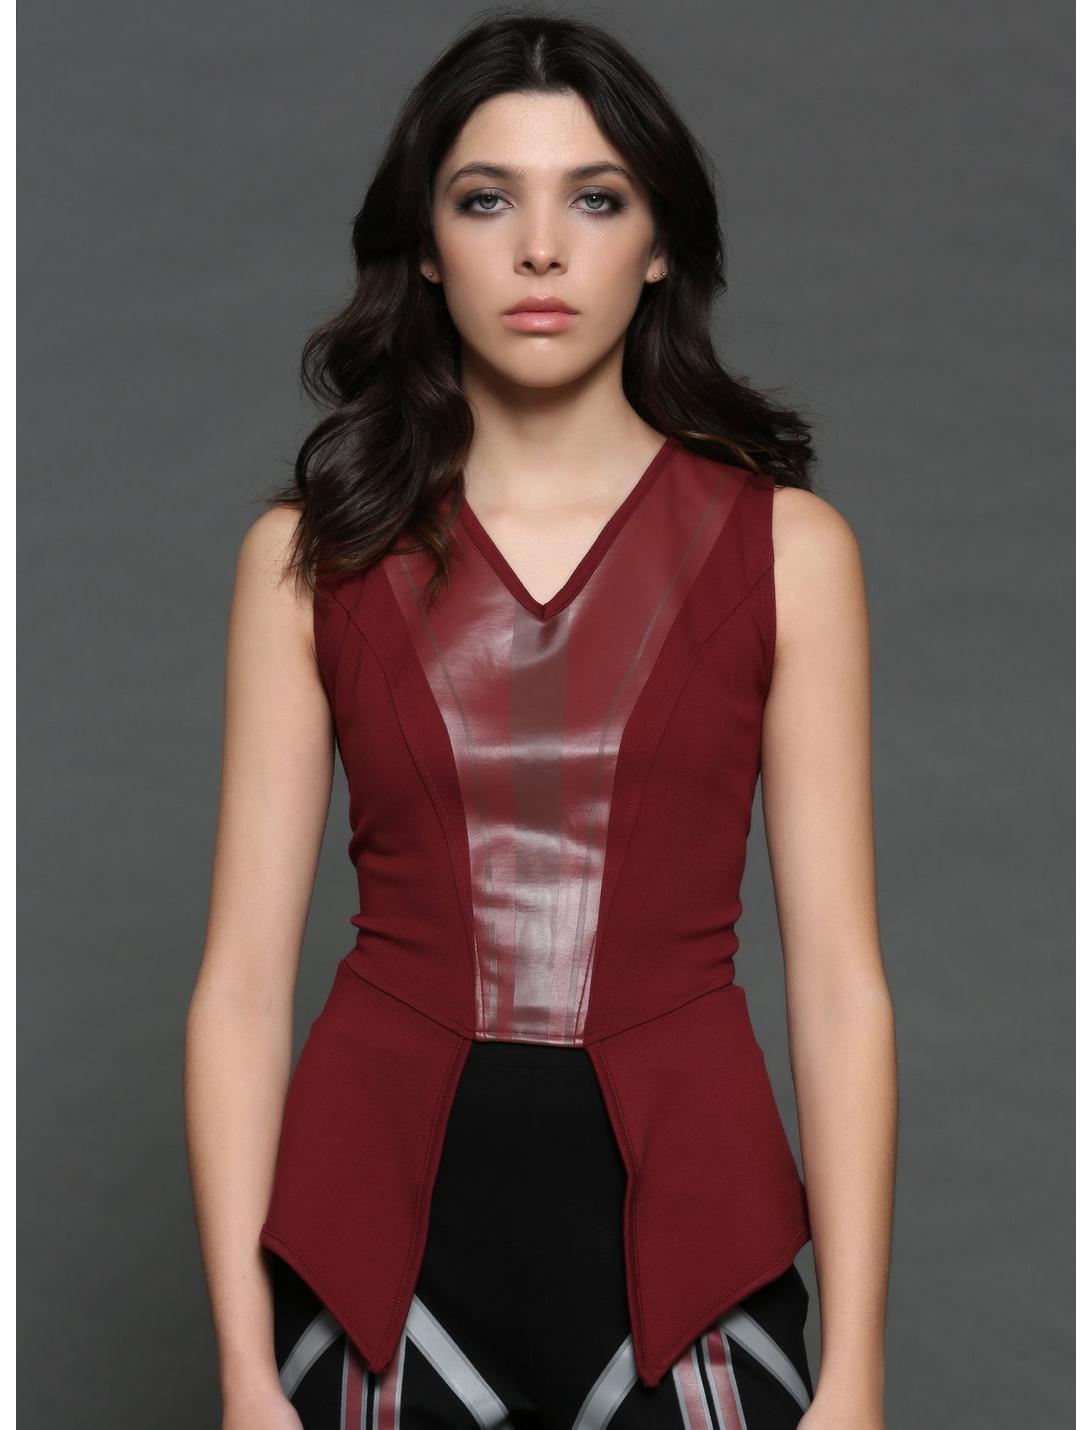 Her Universe Marvel WandaVision Scarlet Witch Replica Top, RED, hi-res